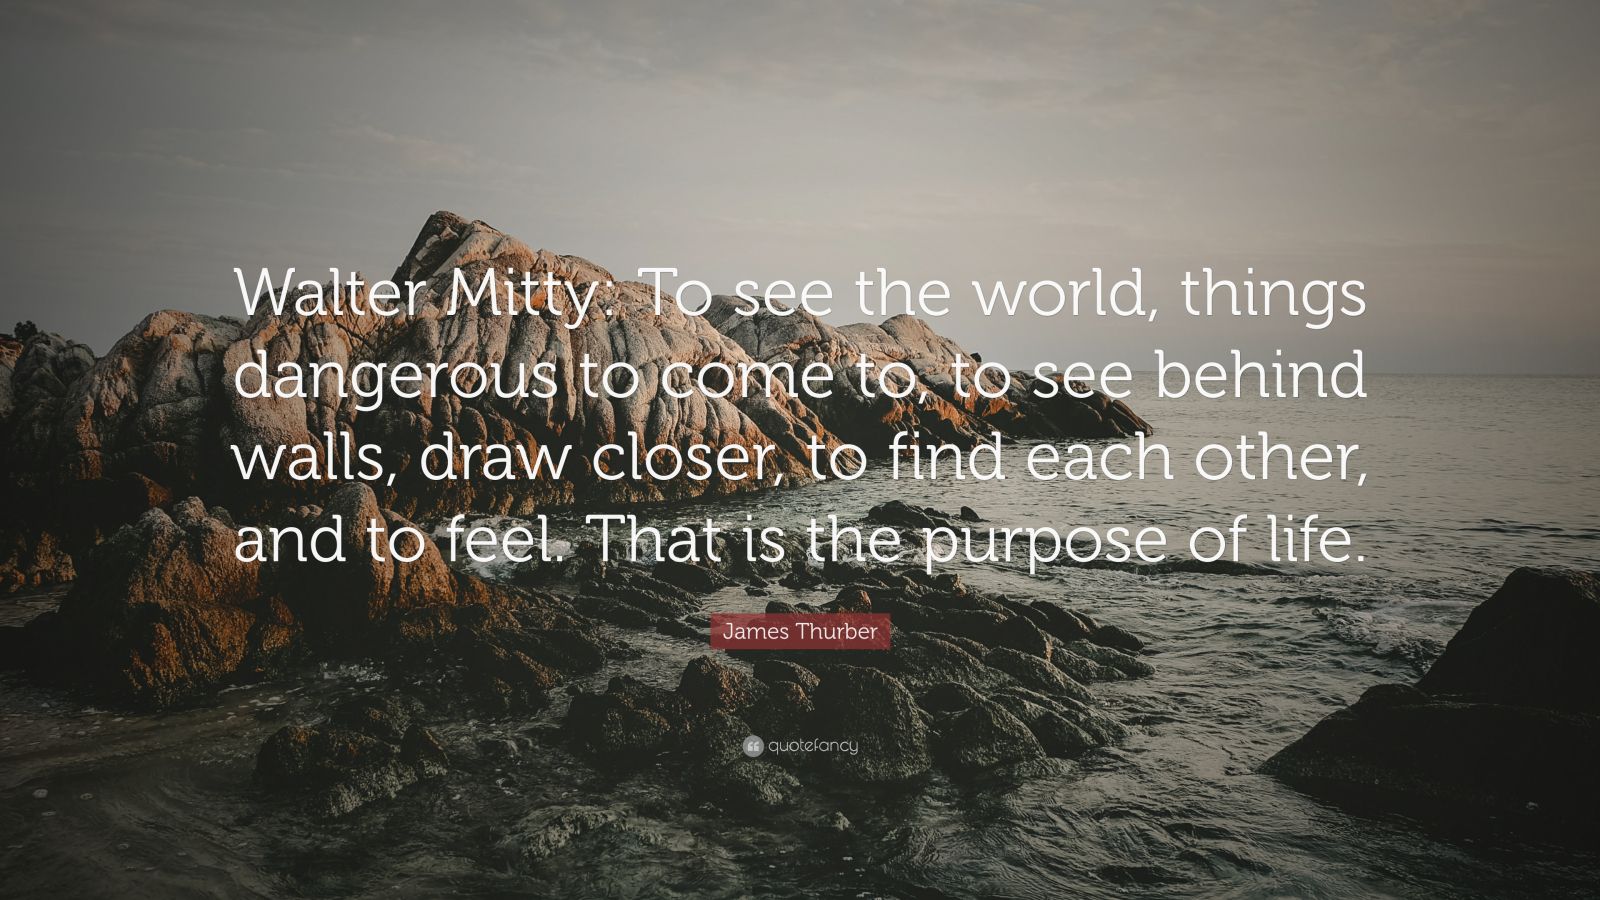 james thurber walter mitty